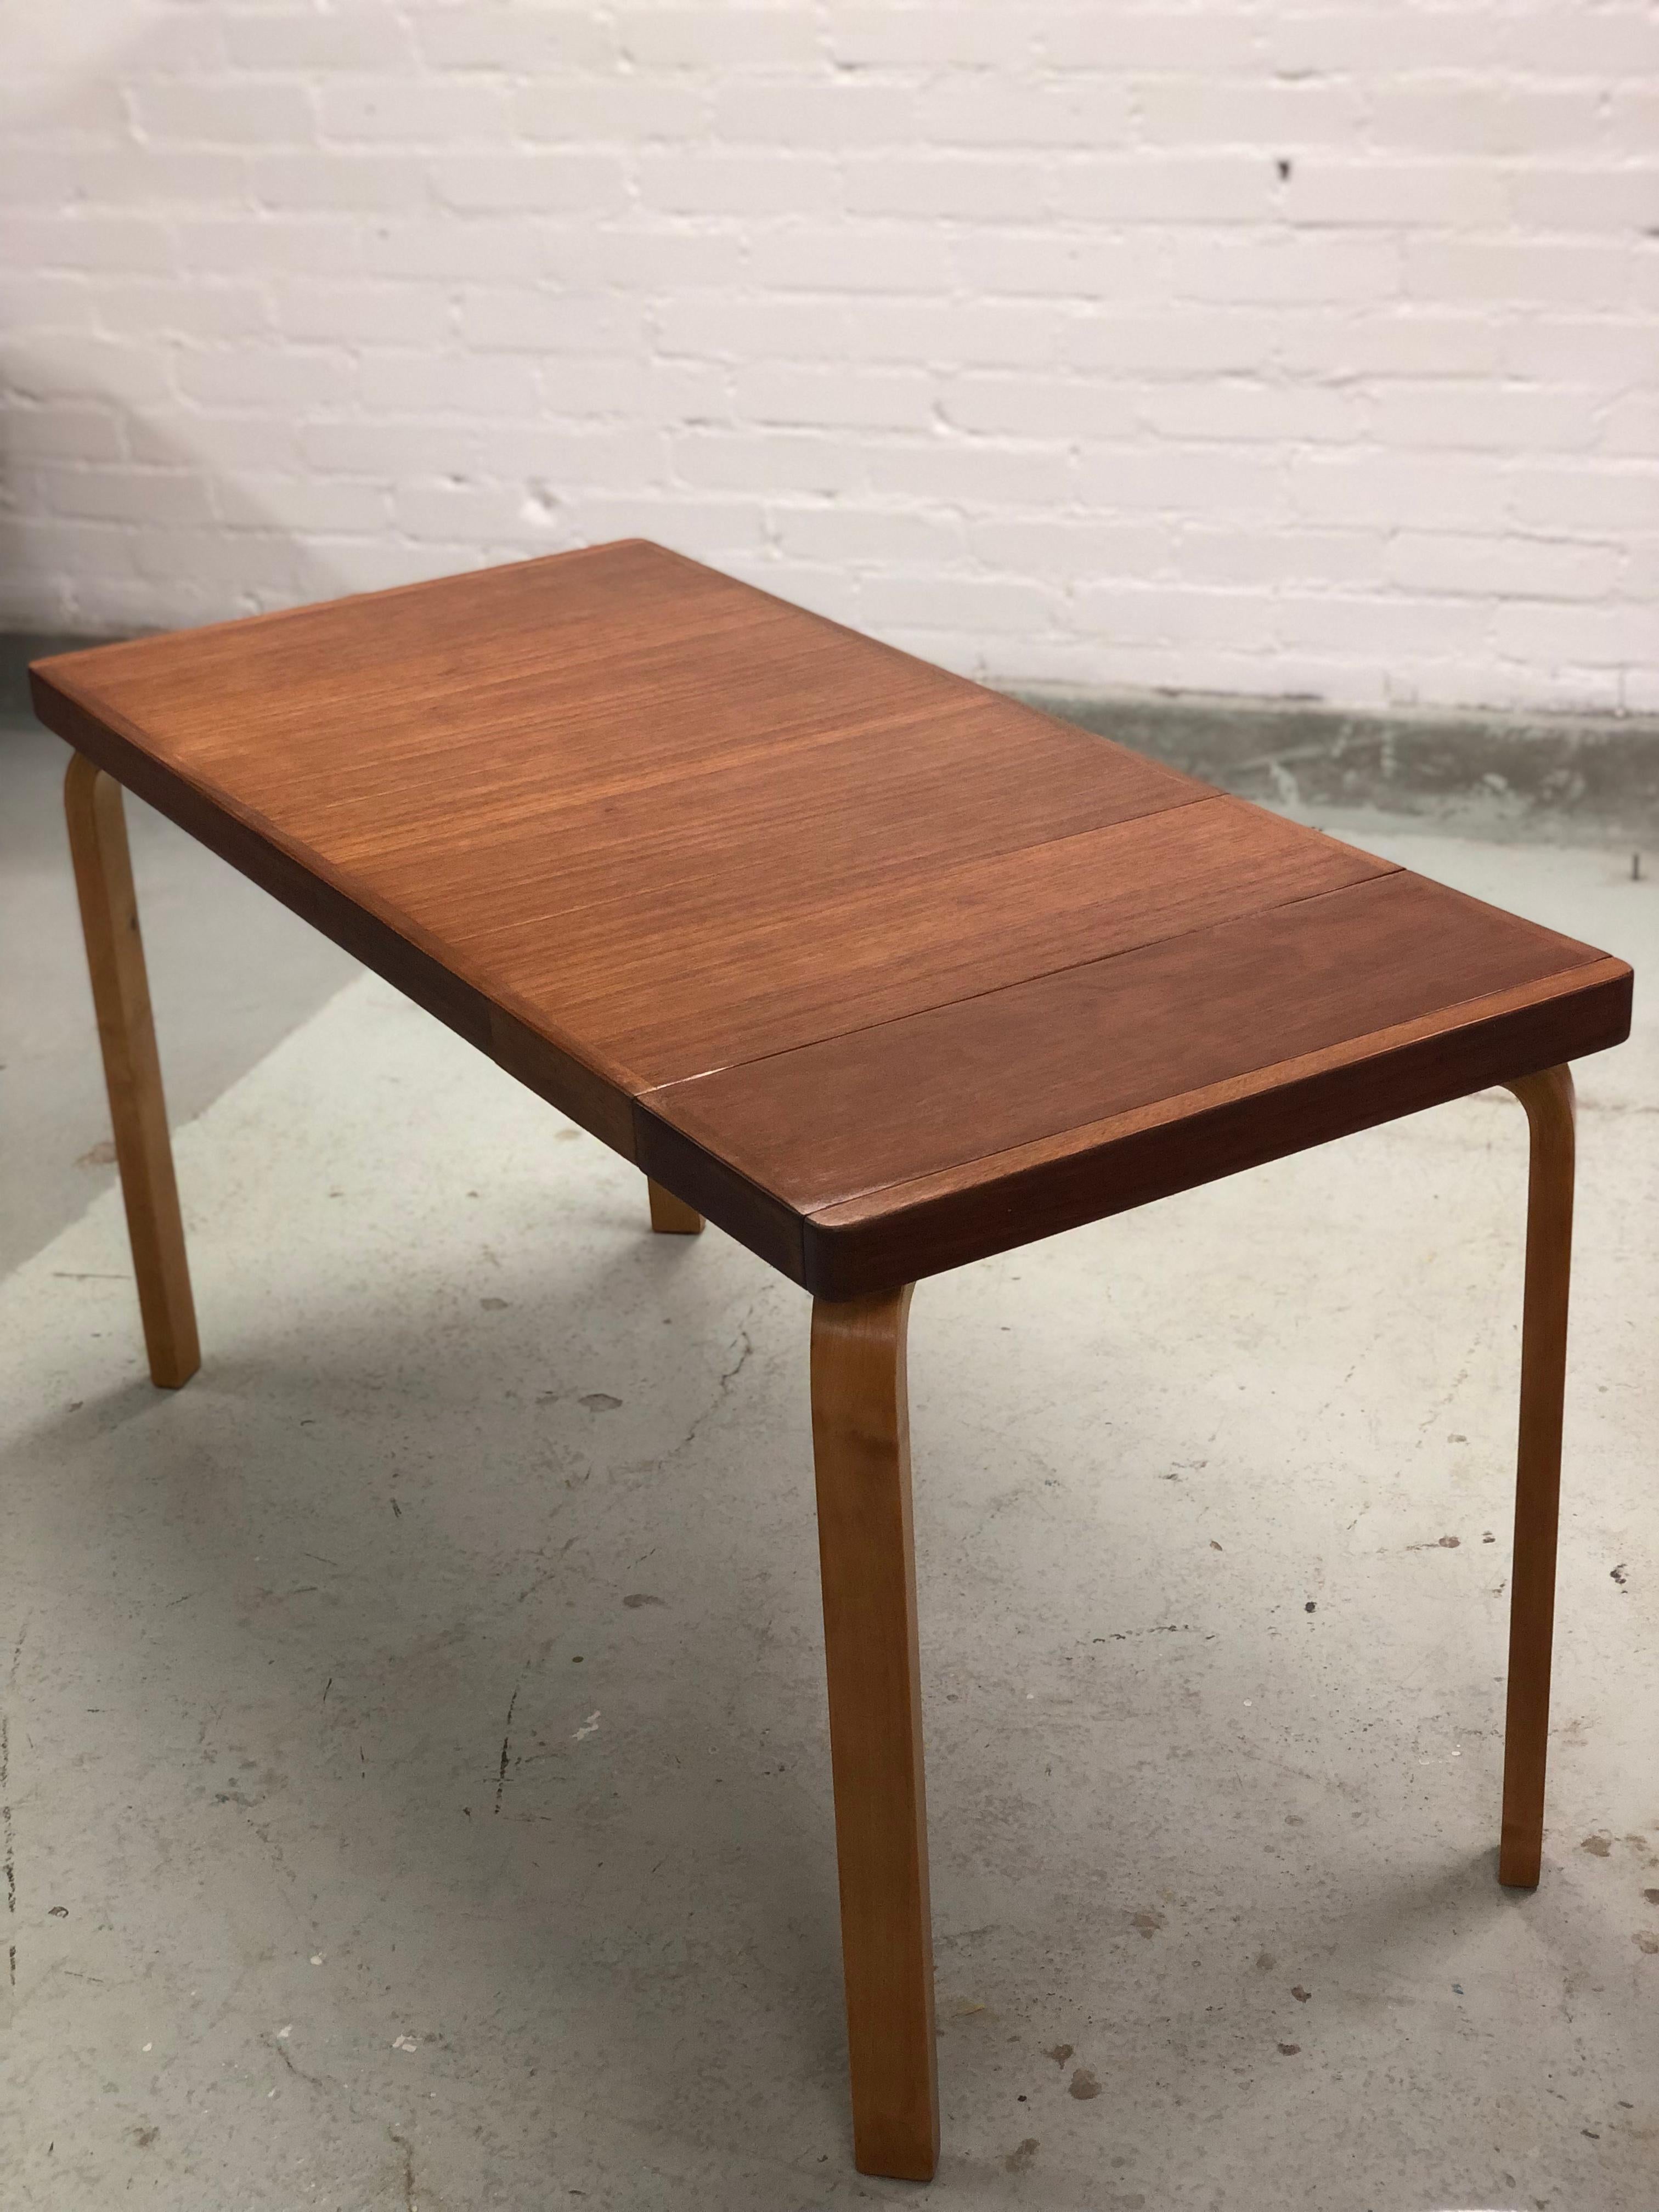 Aino Aalto extendable table with a teak top and birch legs. Designed by Aalto and manufactured by Artek in the 1930s. The table is 95cm long but has an opening with two separate 20cm long extensions which can make the table either 115cm or 135cm